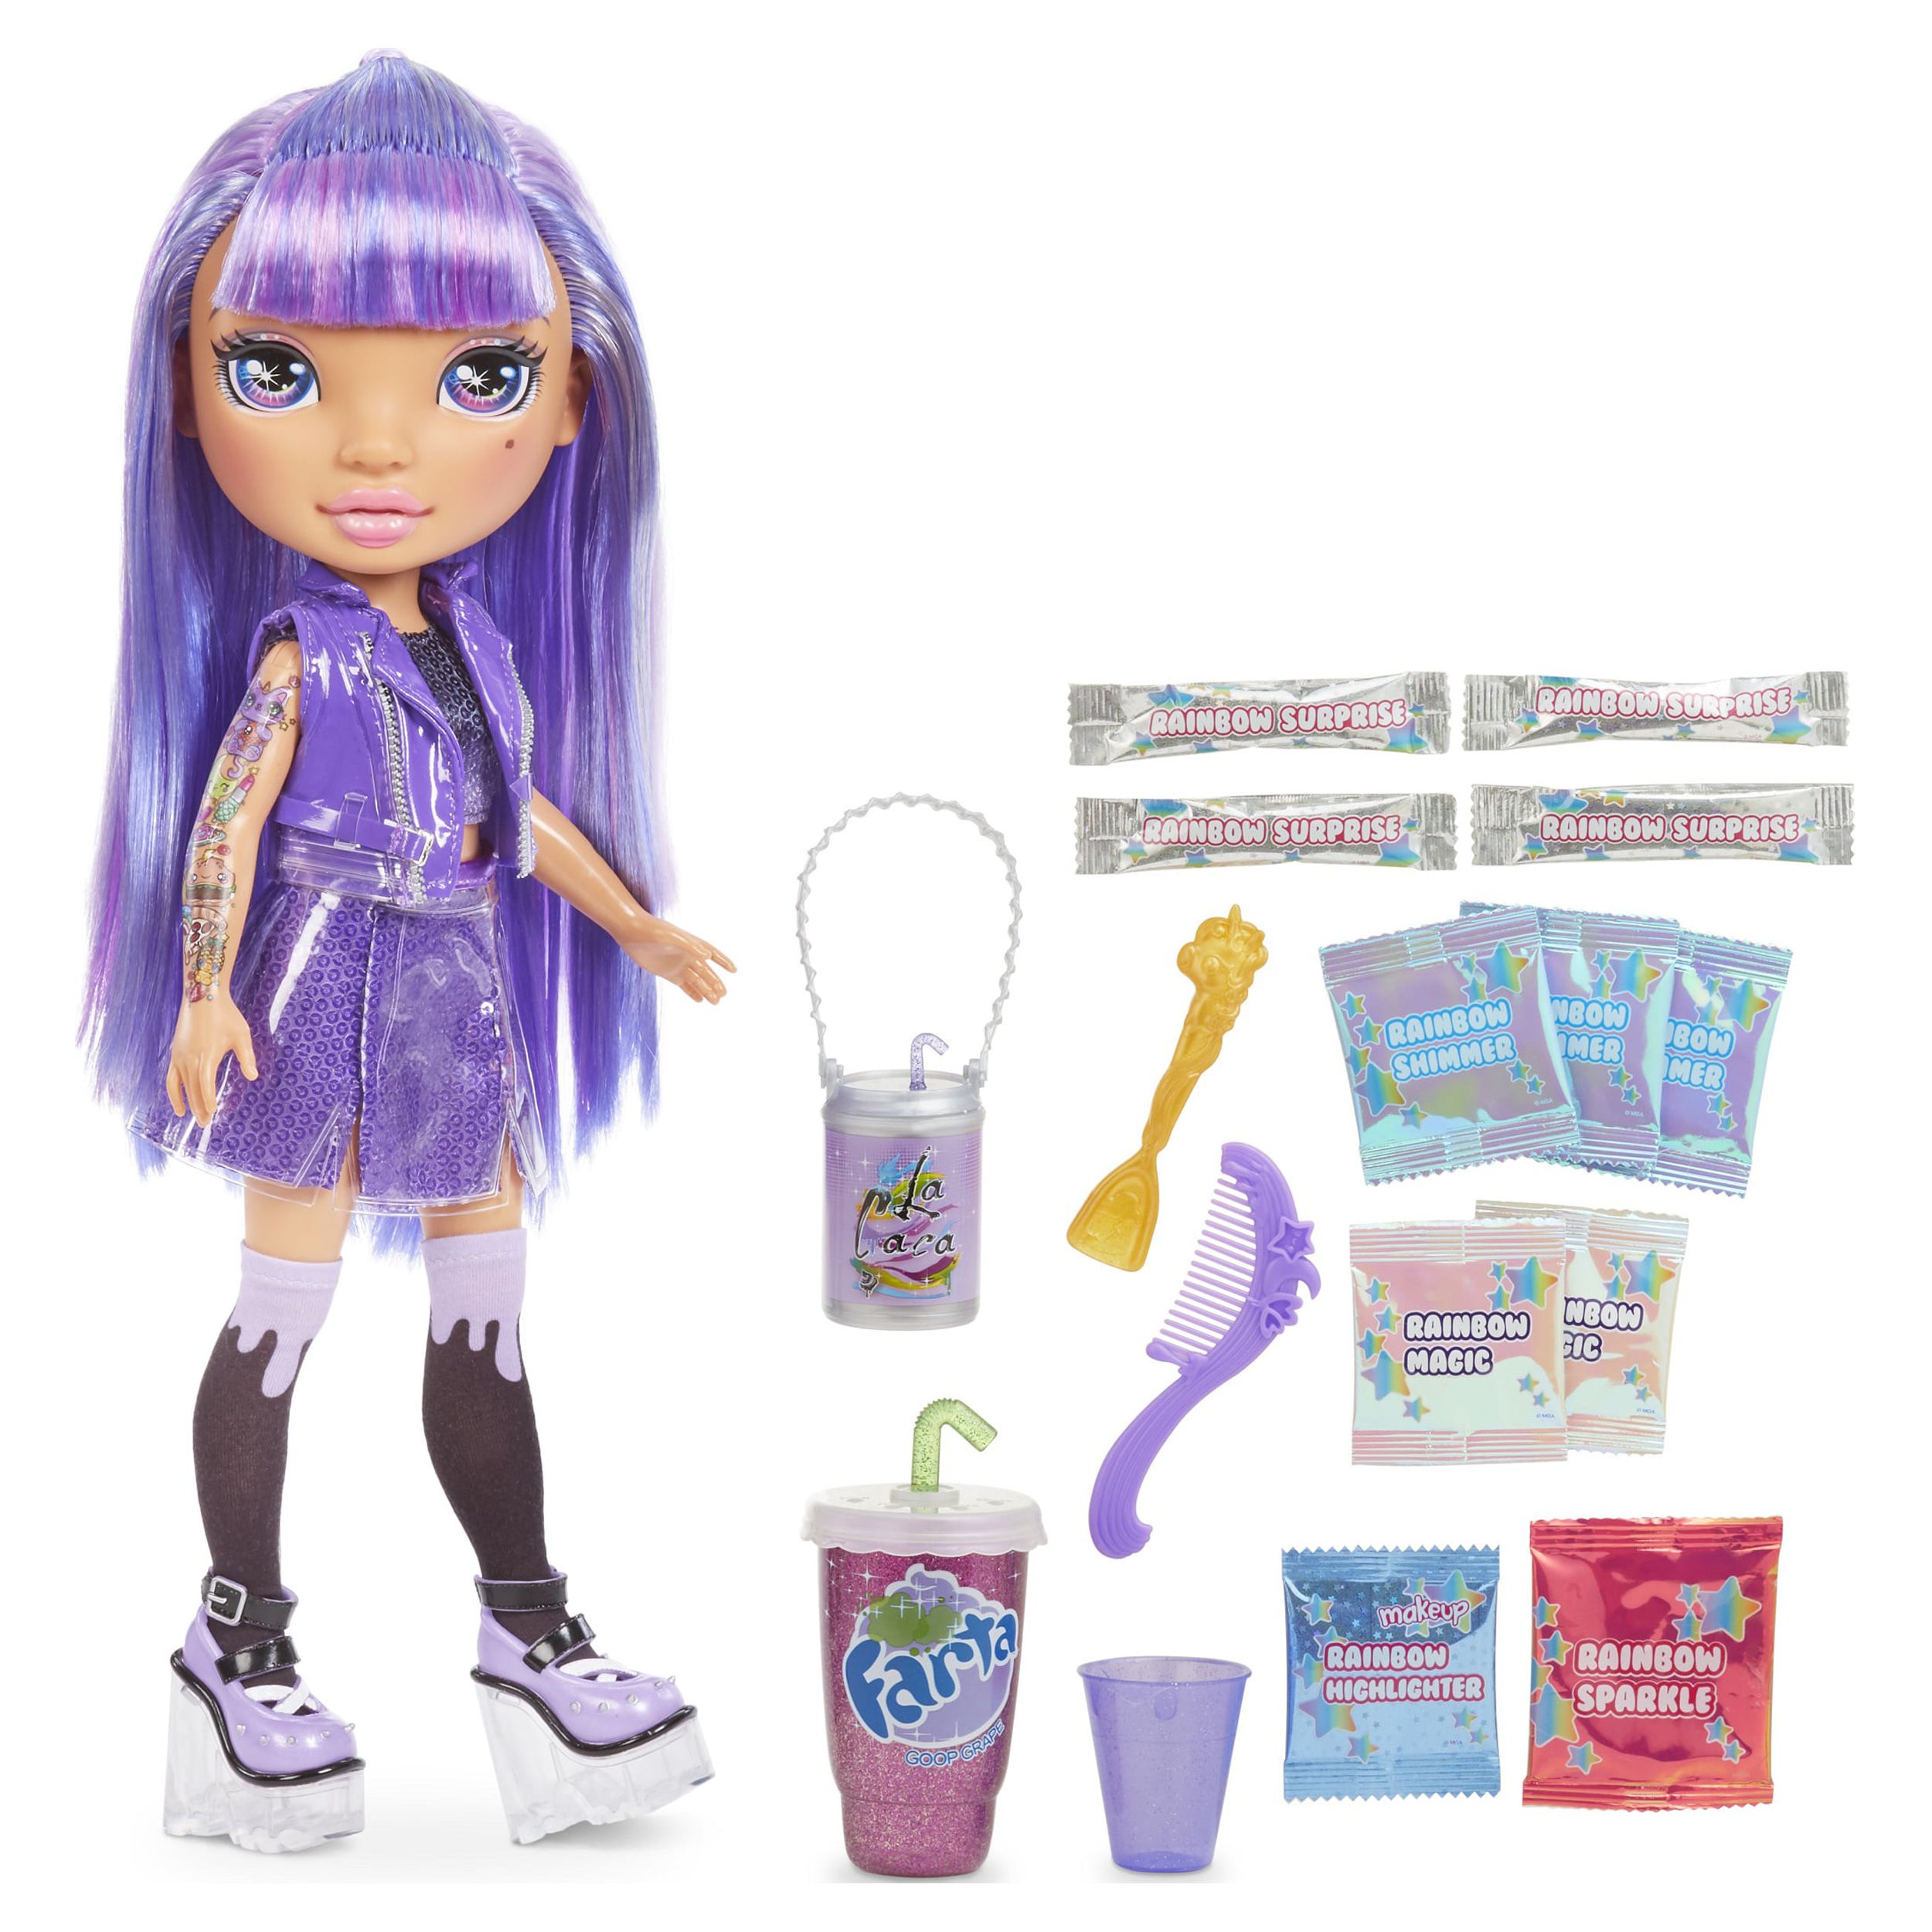 Rainbow Surprise by Poopsie: 14" Doll with 20+ Slime & Fashion Surprises, Amethyst Rae or Blue Skye - image 3 of 7